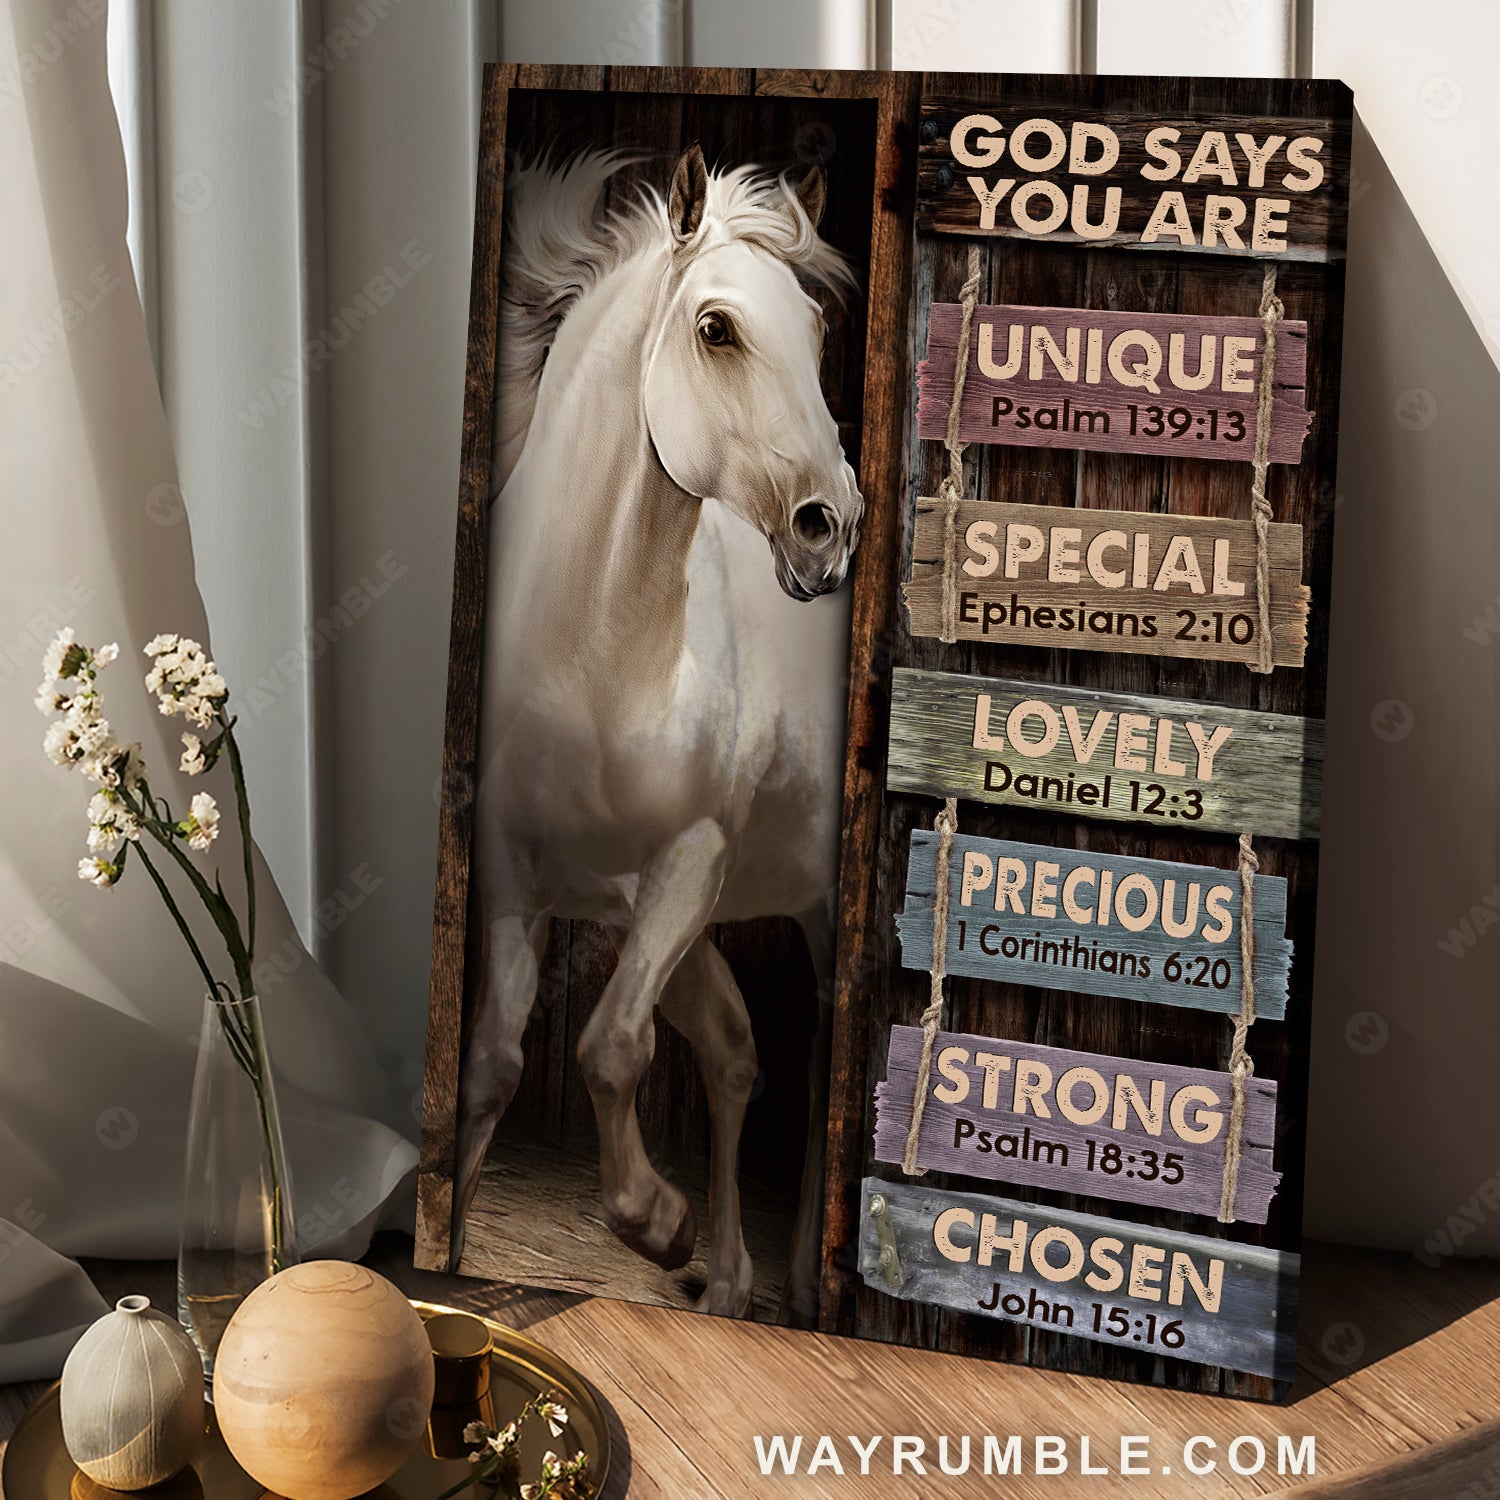 White horse, Animal painting, Jesus is Lord, God says you are - Jesus Portrait Canvas Prints, Christian Wall Art